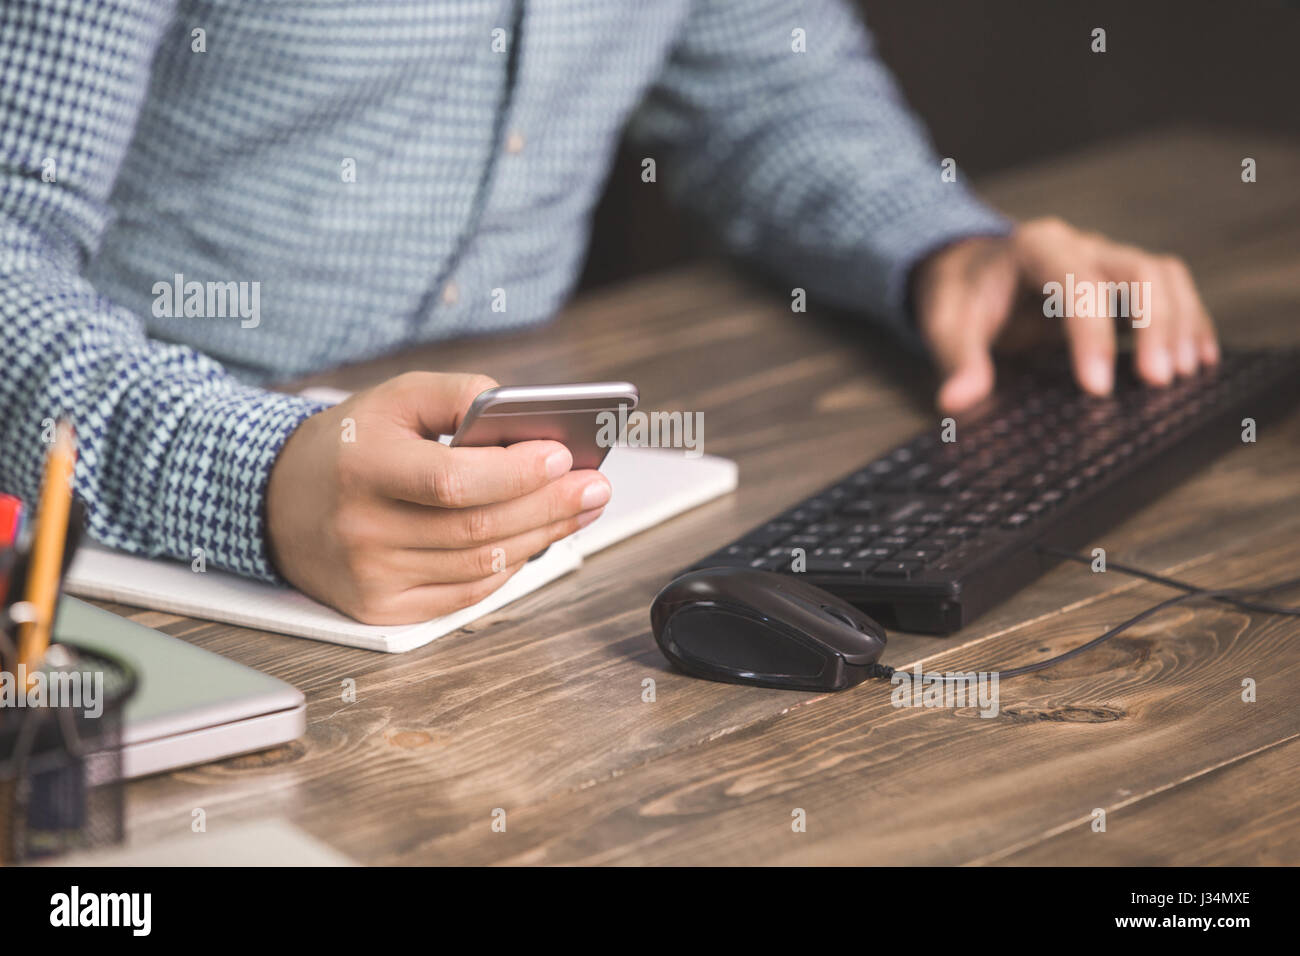 Young Man Programmer Computer Technology Work Concept Stock Photo